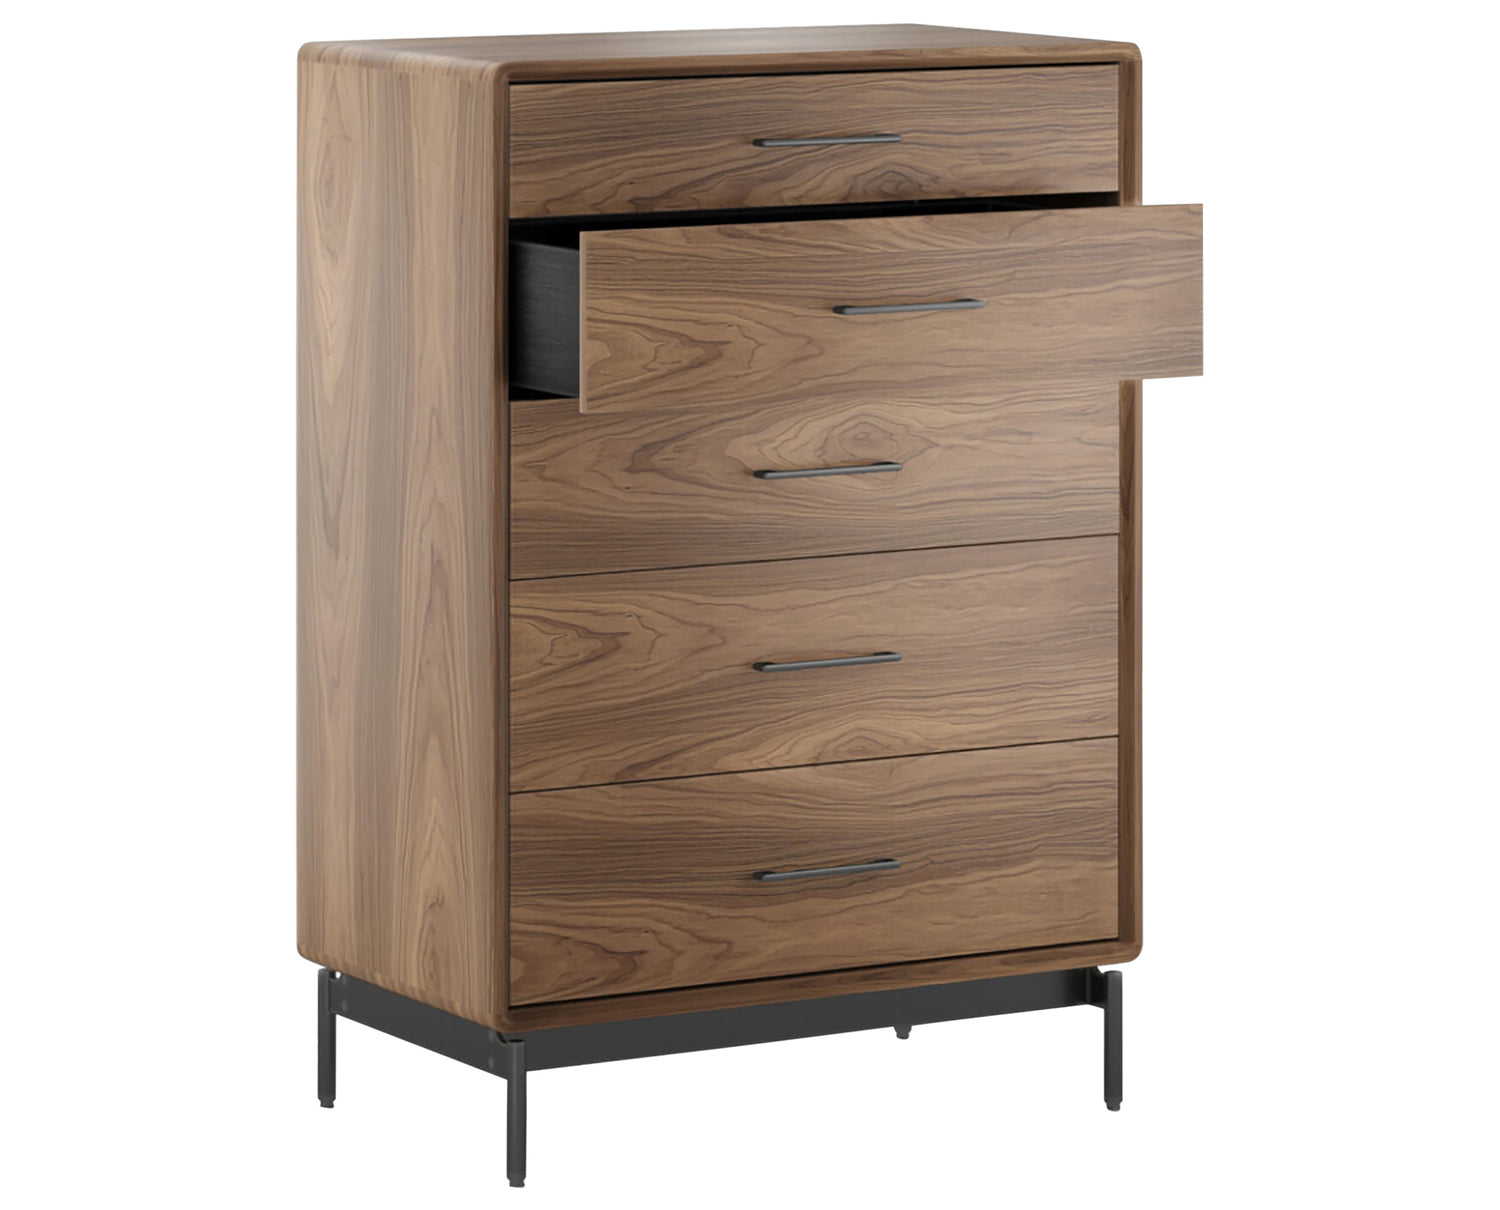 Natural Walnut with Powder Coated Steel | BDI Linq 5 Drawer Chest | Valley Ridge Furniture